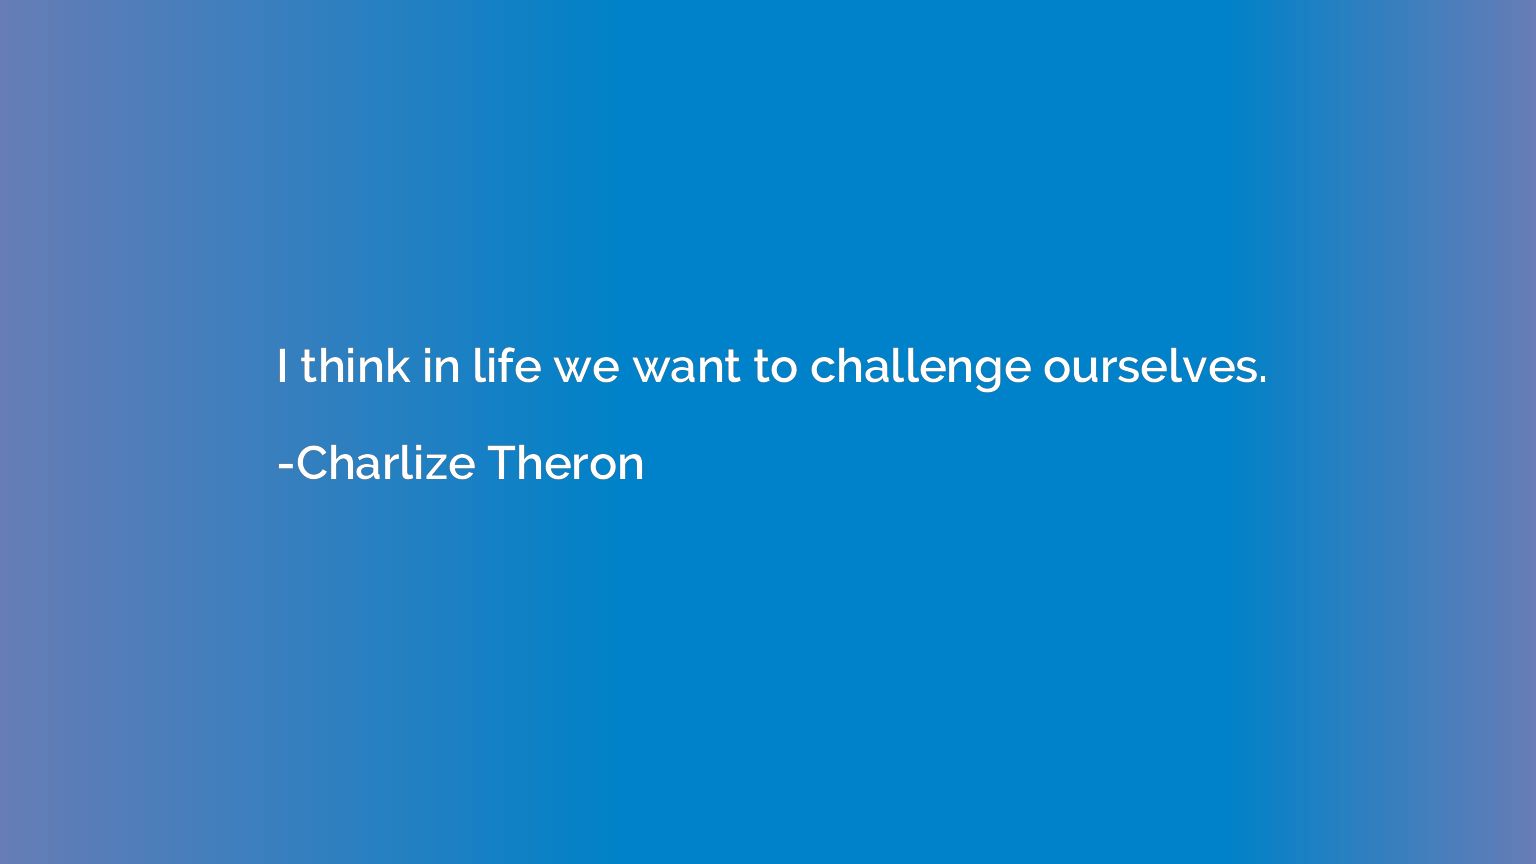 I think in life we want to challenge ourselves.